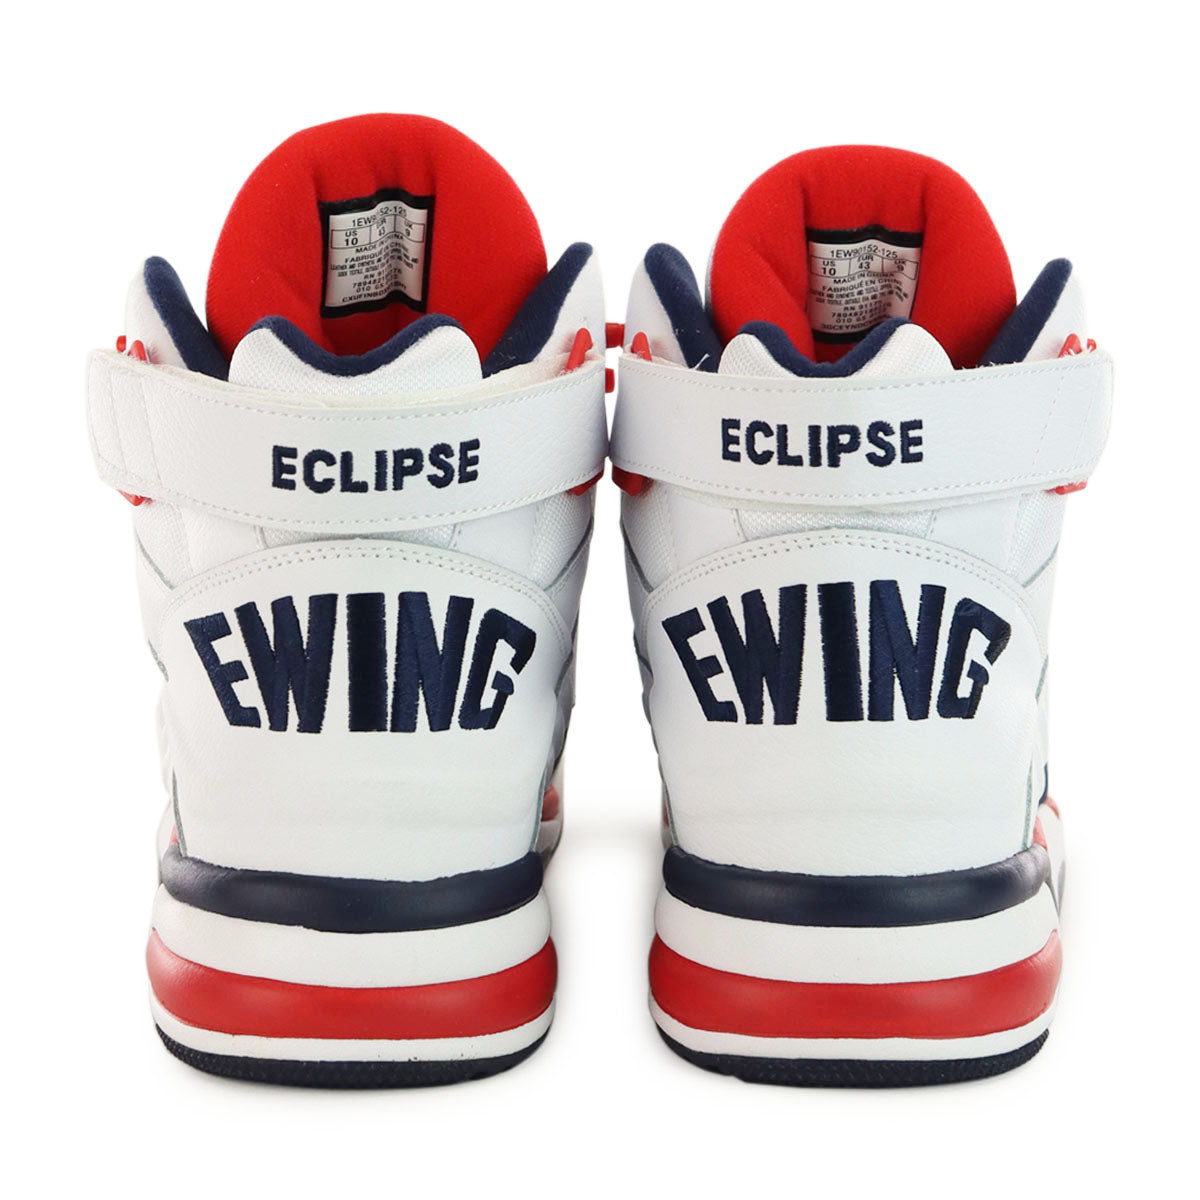 Patrick Ewing Eclipse Olympic Games Edition 1EW90152-125-